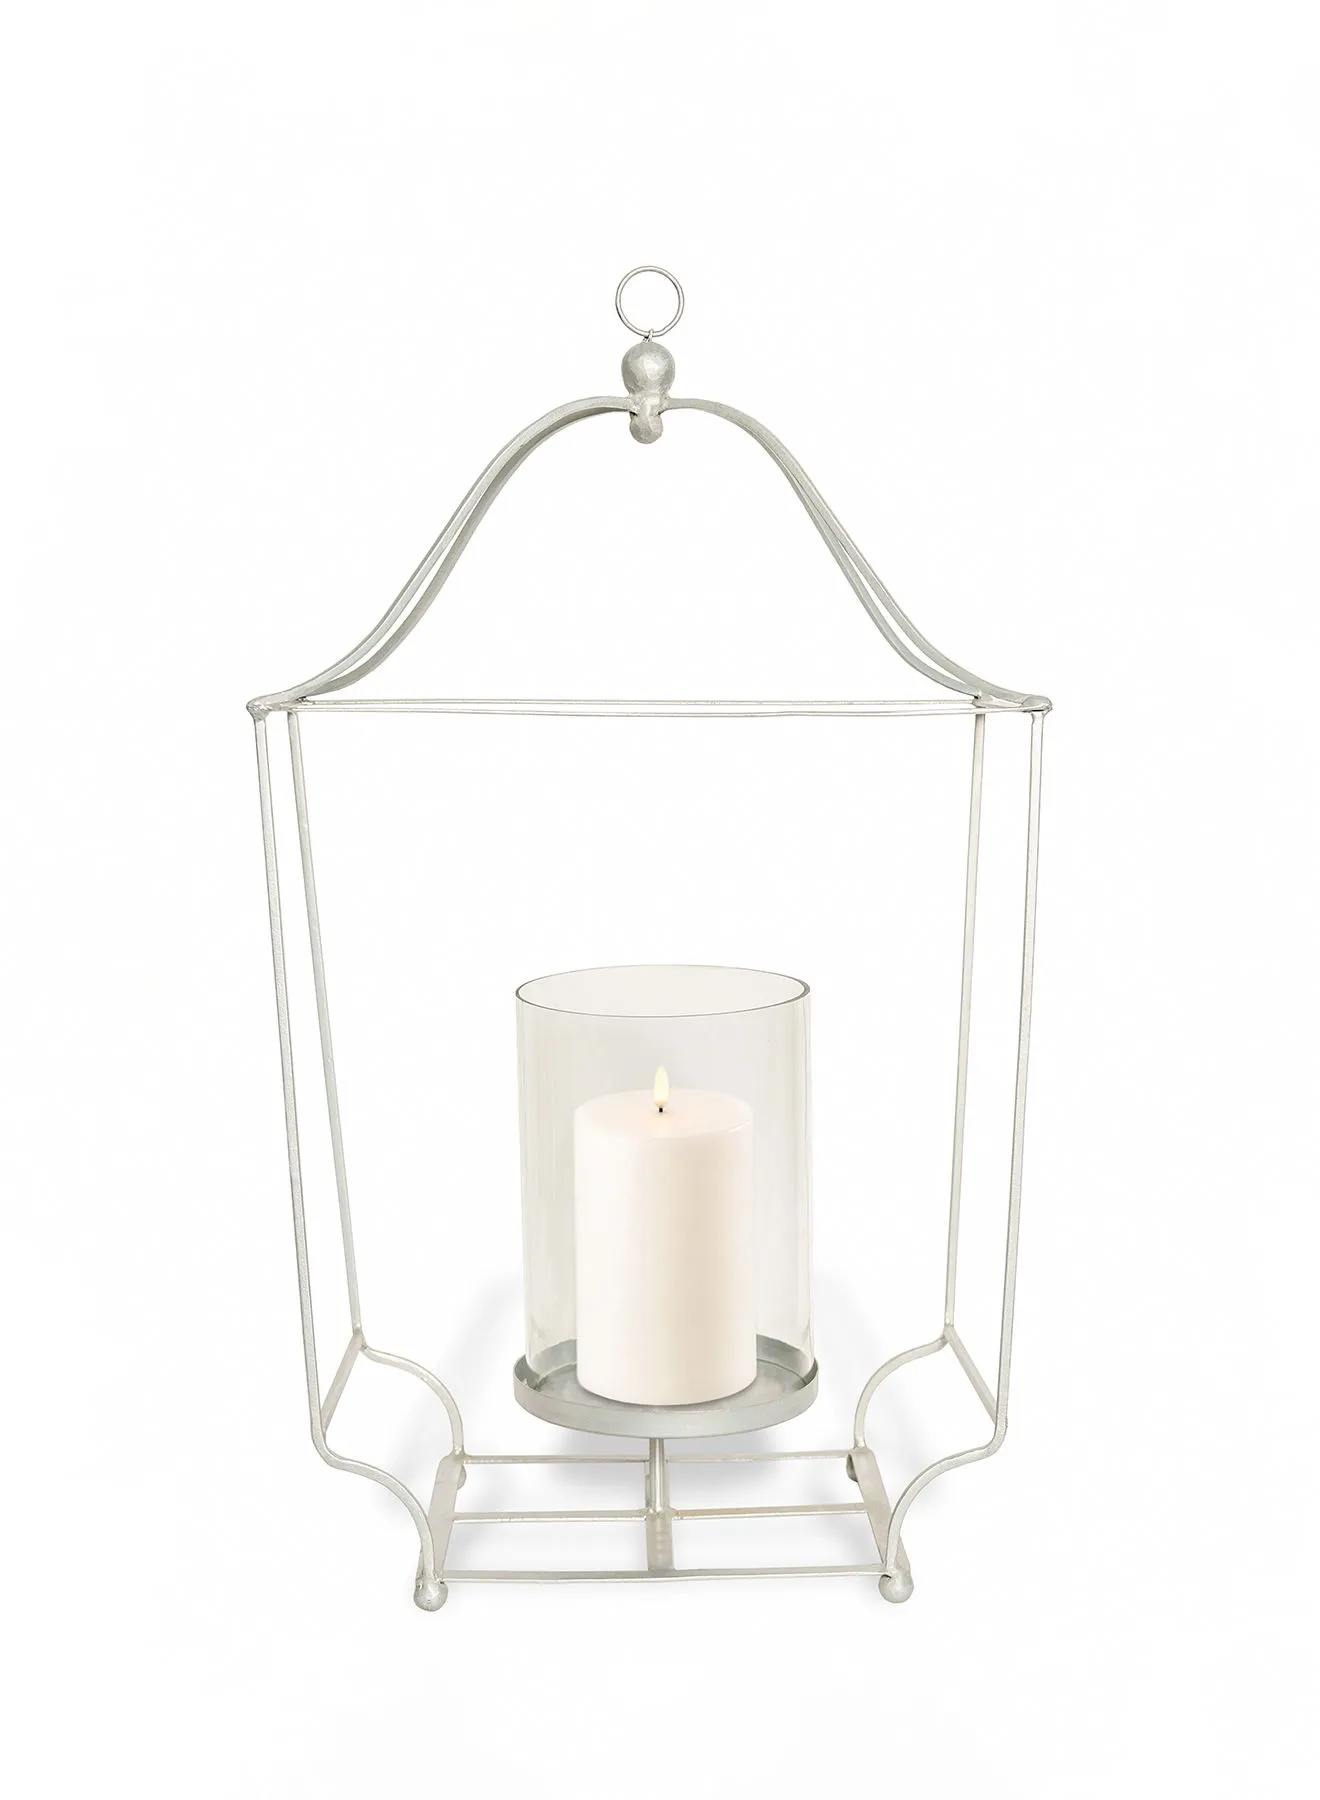 ebb & flow Modern Ideal Design Handmade Lantern Unique Luxury Quality Scents For The Perfect Stylish Home Silver 20X19X54centimeter